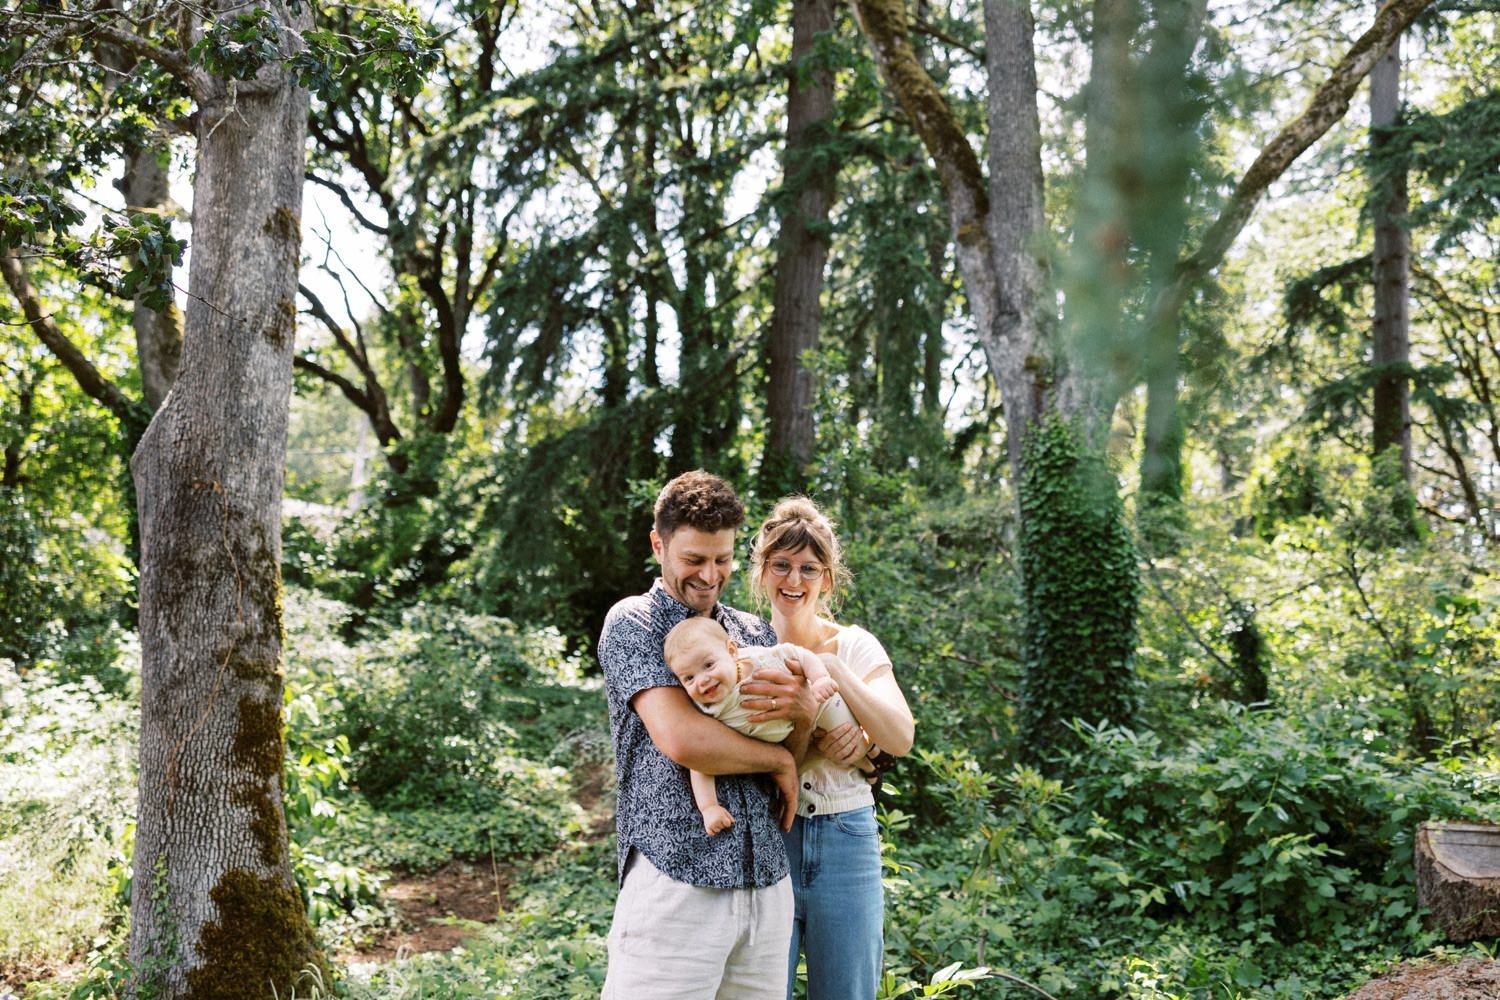 10_Portland Family Photographer-7579_mom and dad hold baby daugher while surrounded by trees and greenery.jpg